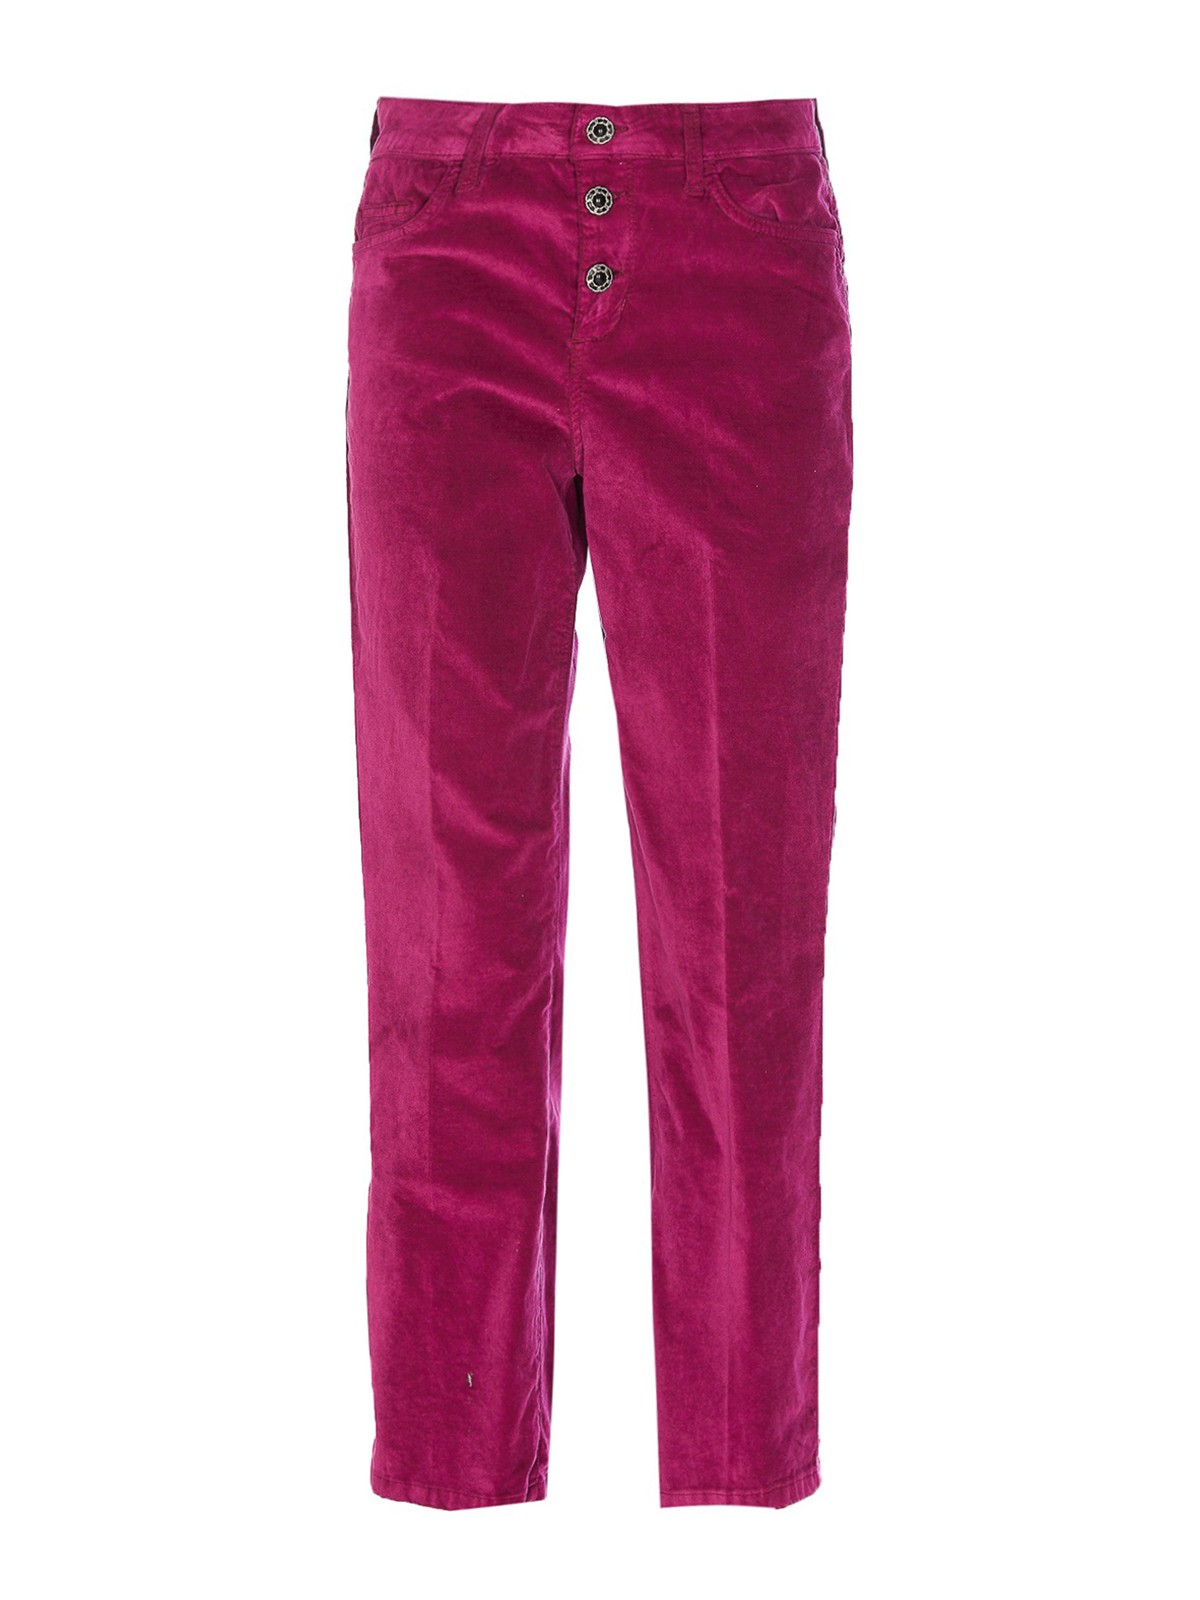 Liu •jo Velvet Pants With Jewel Buttons In Pink